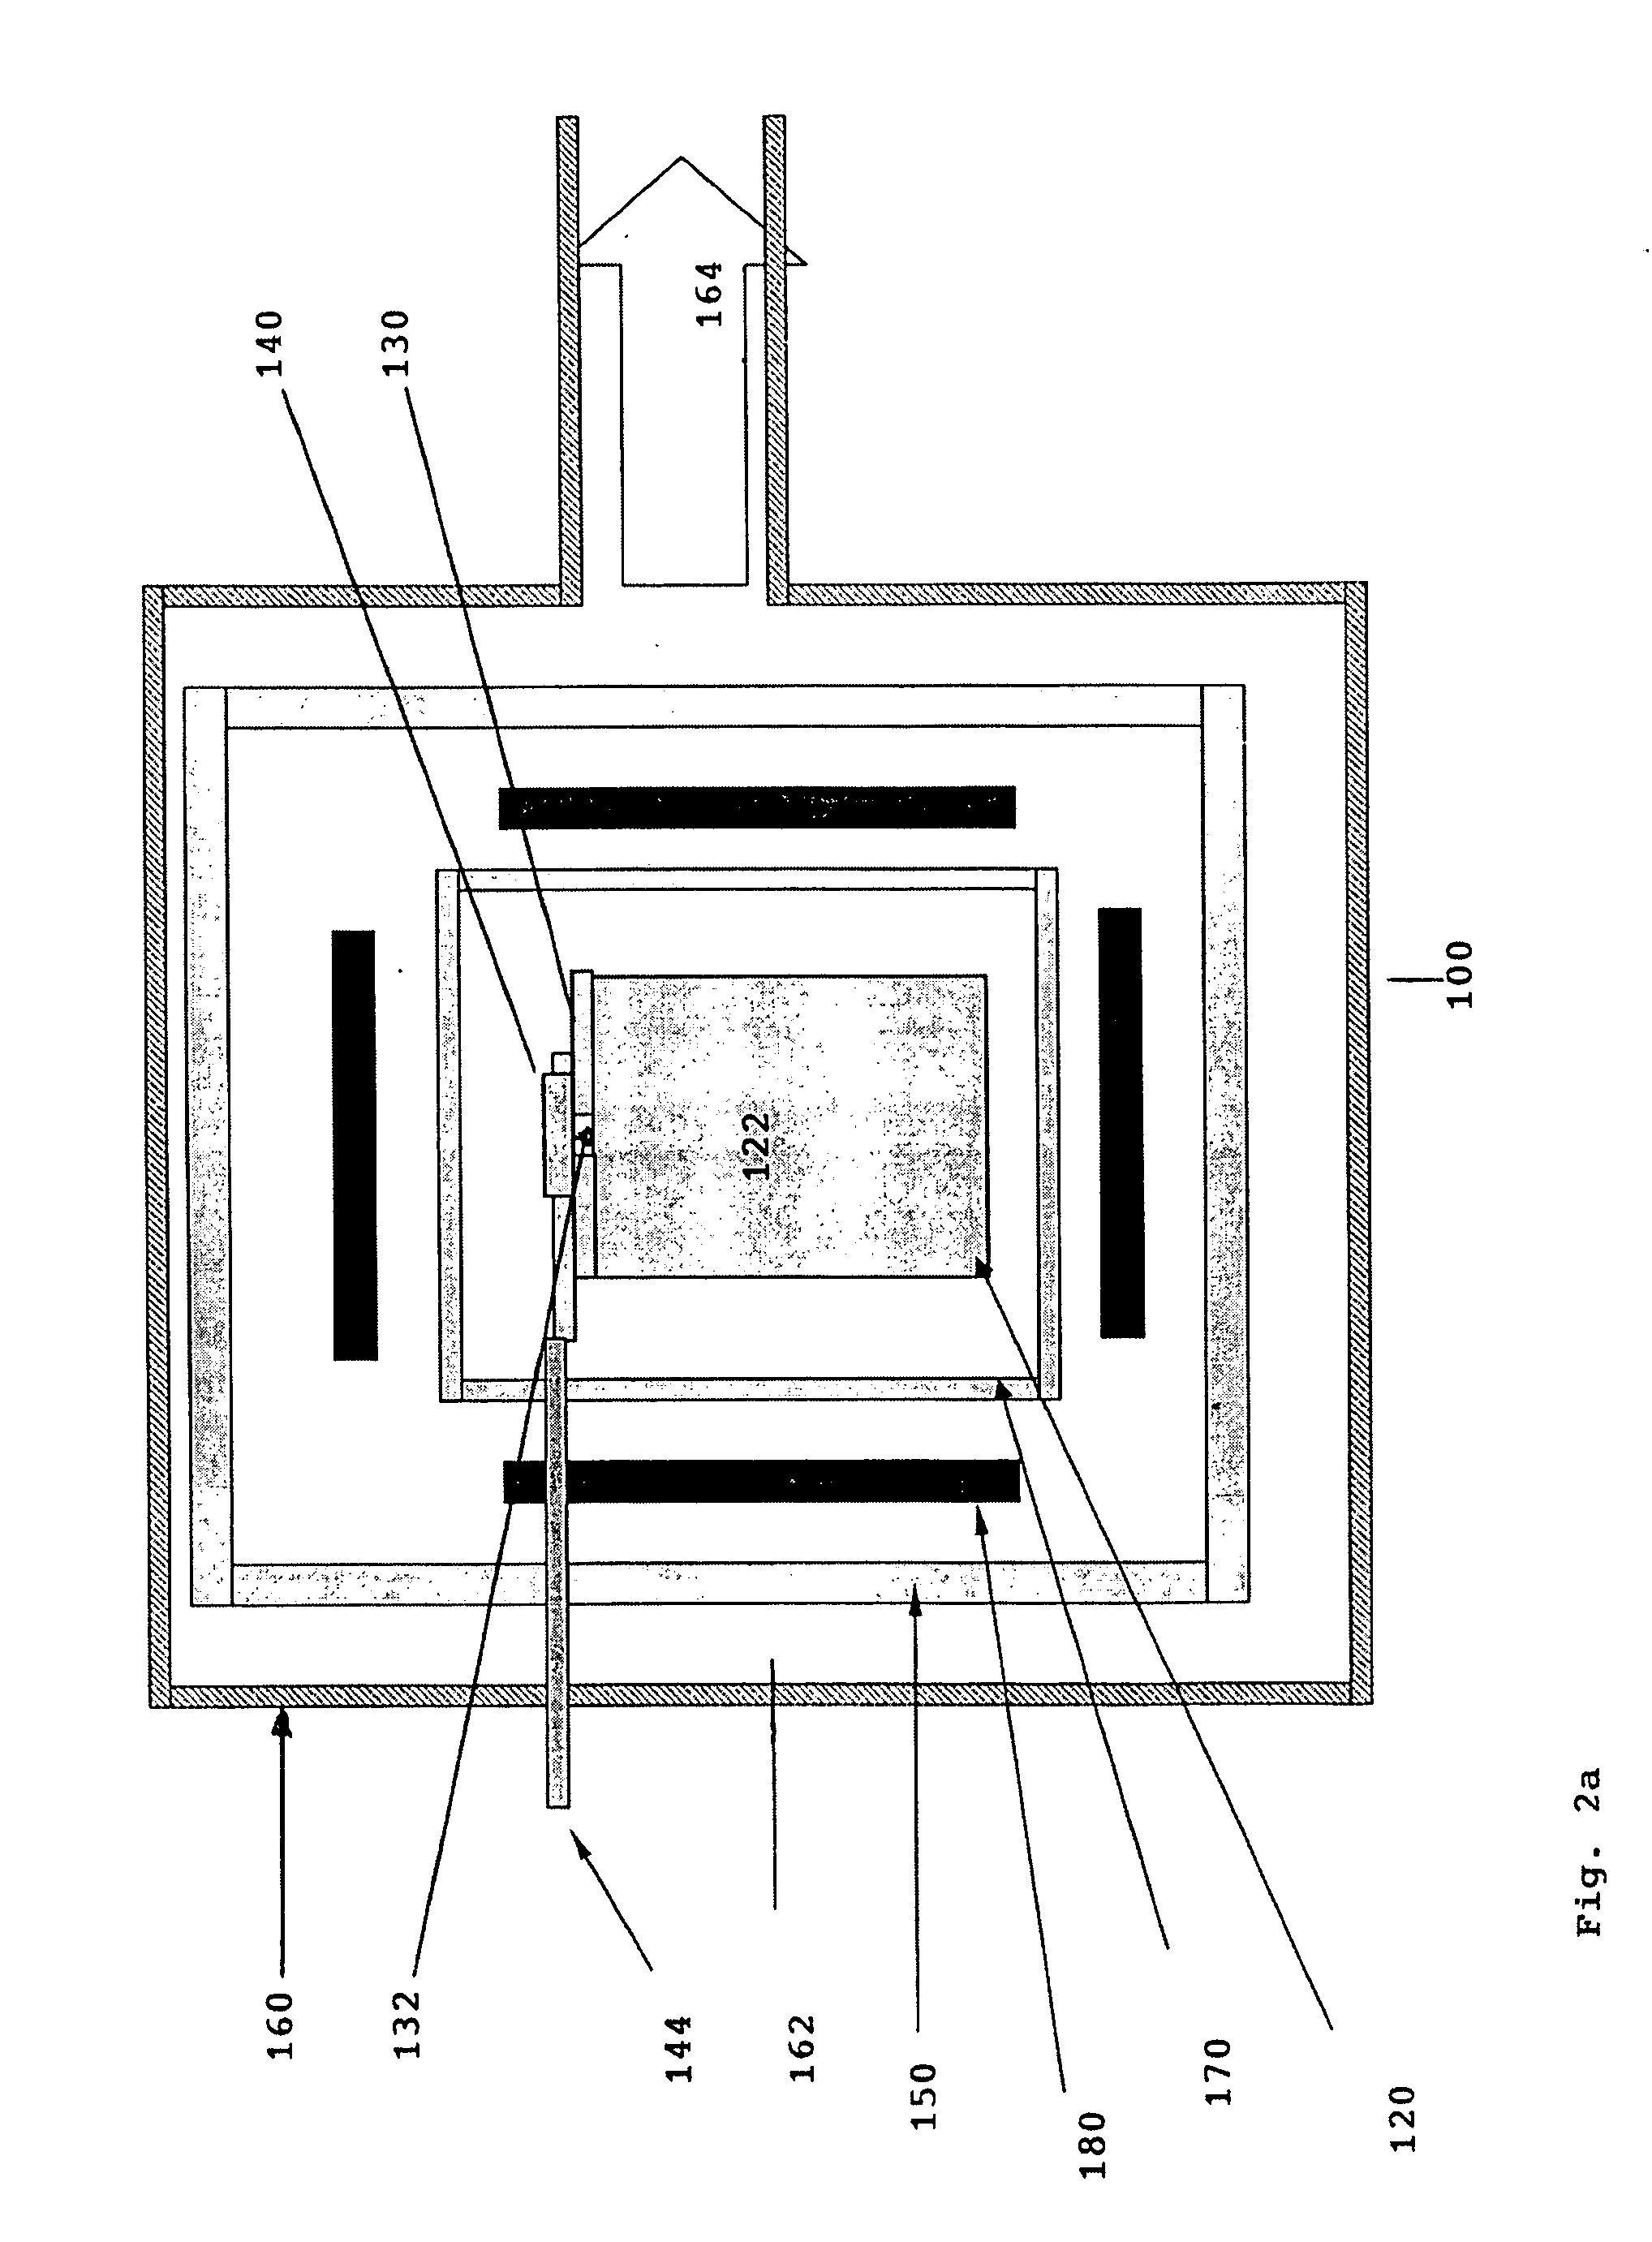 Method and apparatus for purification of crystal material and for making crystals therefrom and use of crystals obtained thereby